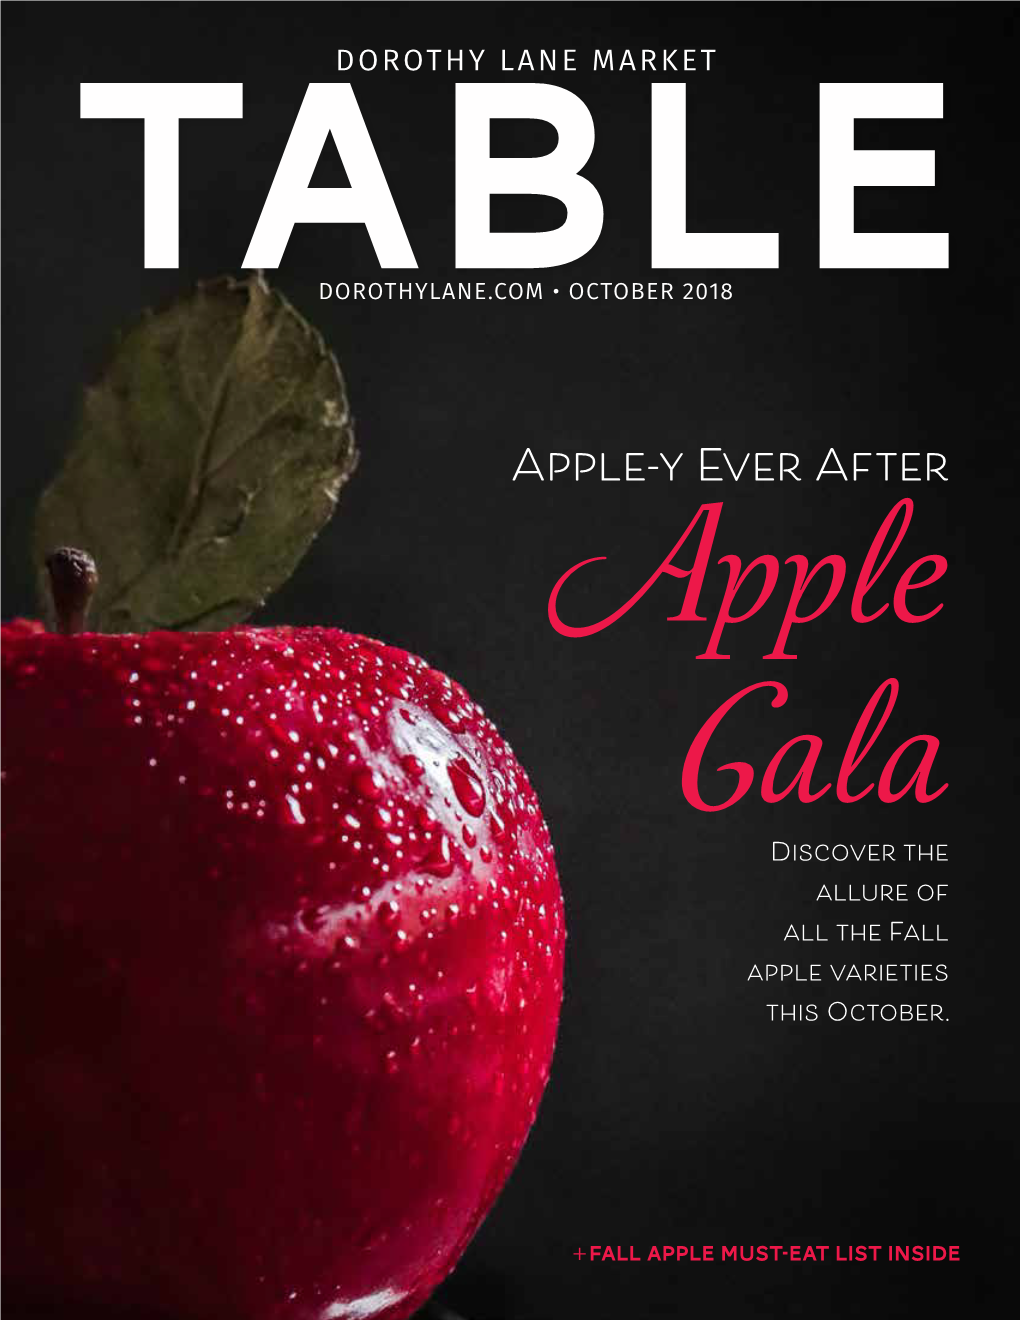 Apple-Y Ever After Apple Gala Discover the Allure of All the Fall Apple Varieties This October